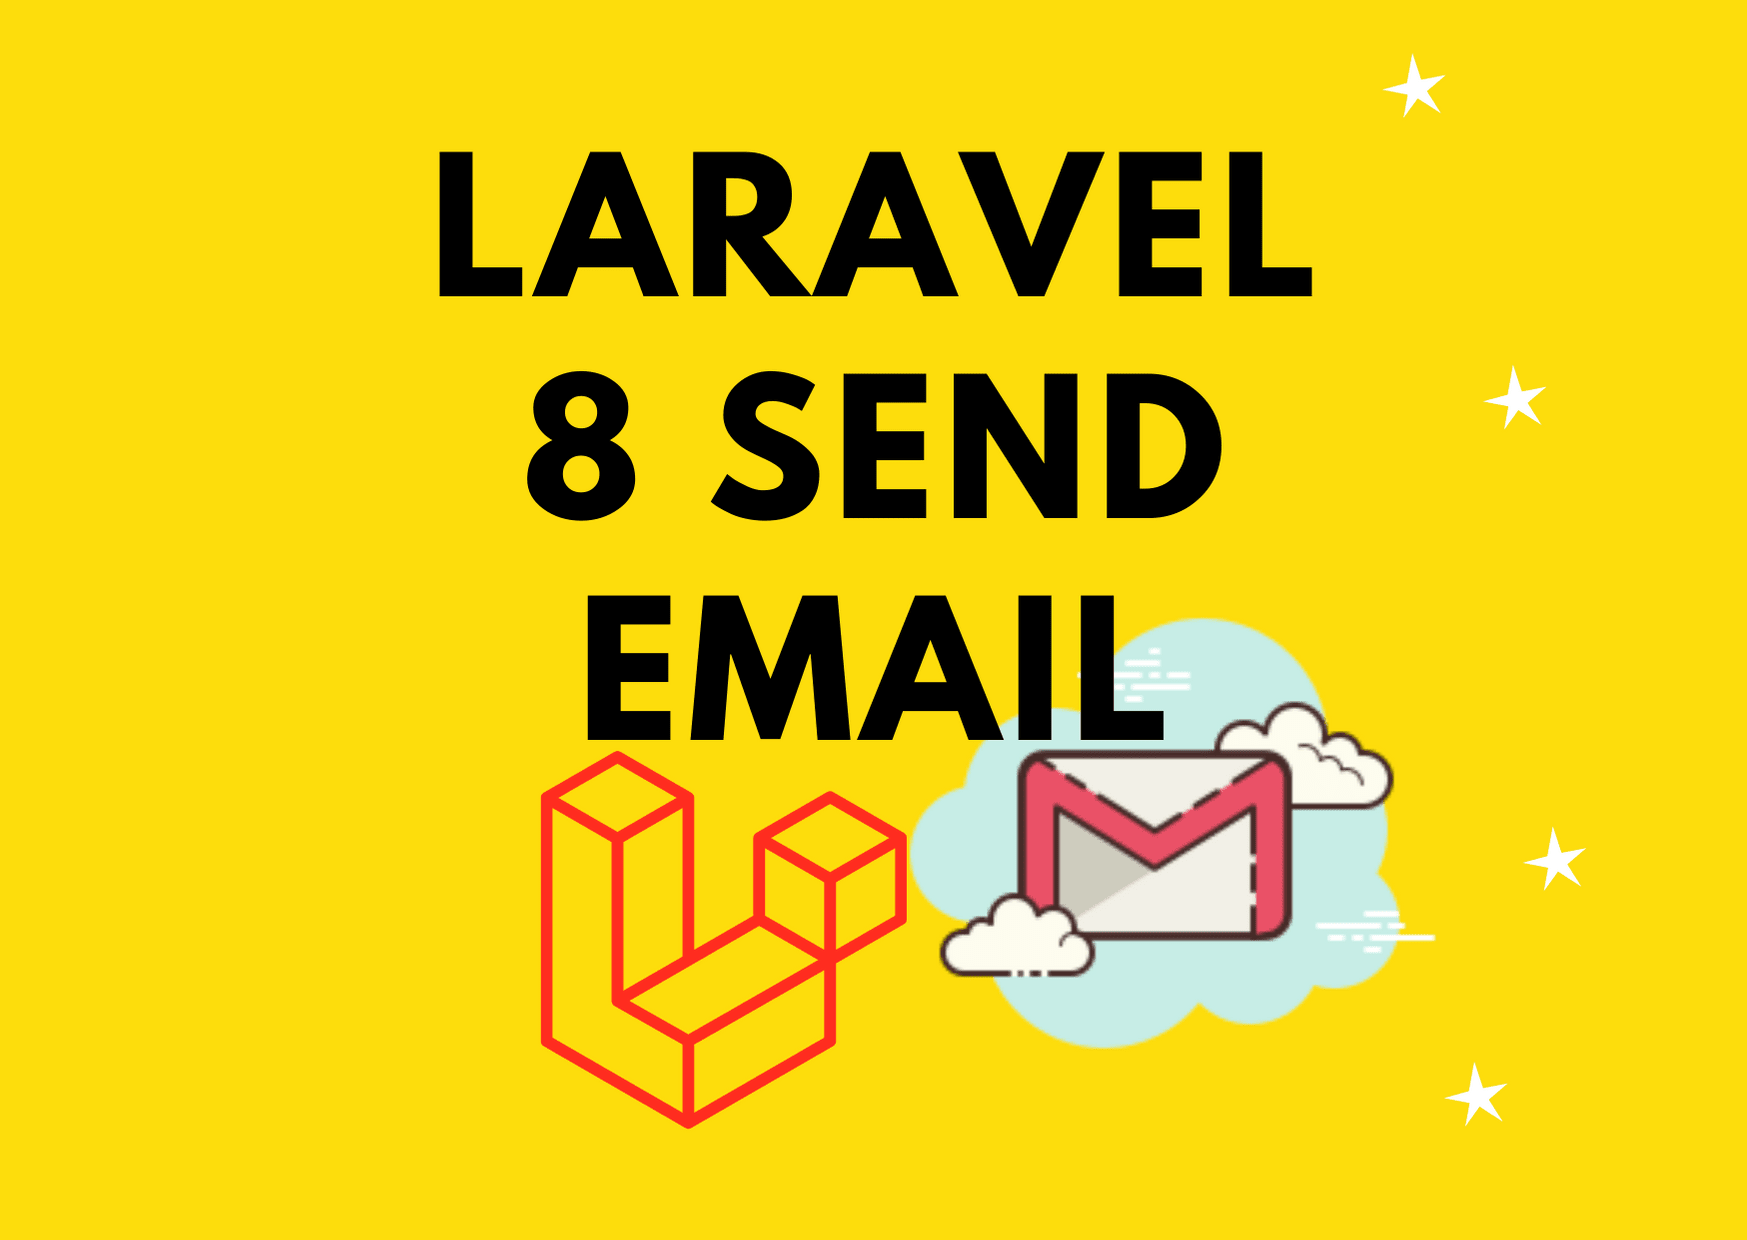 How to Send Email in Laravel 8 using Gmail SMTP